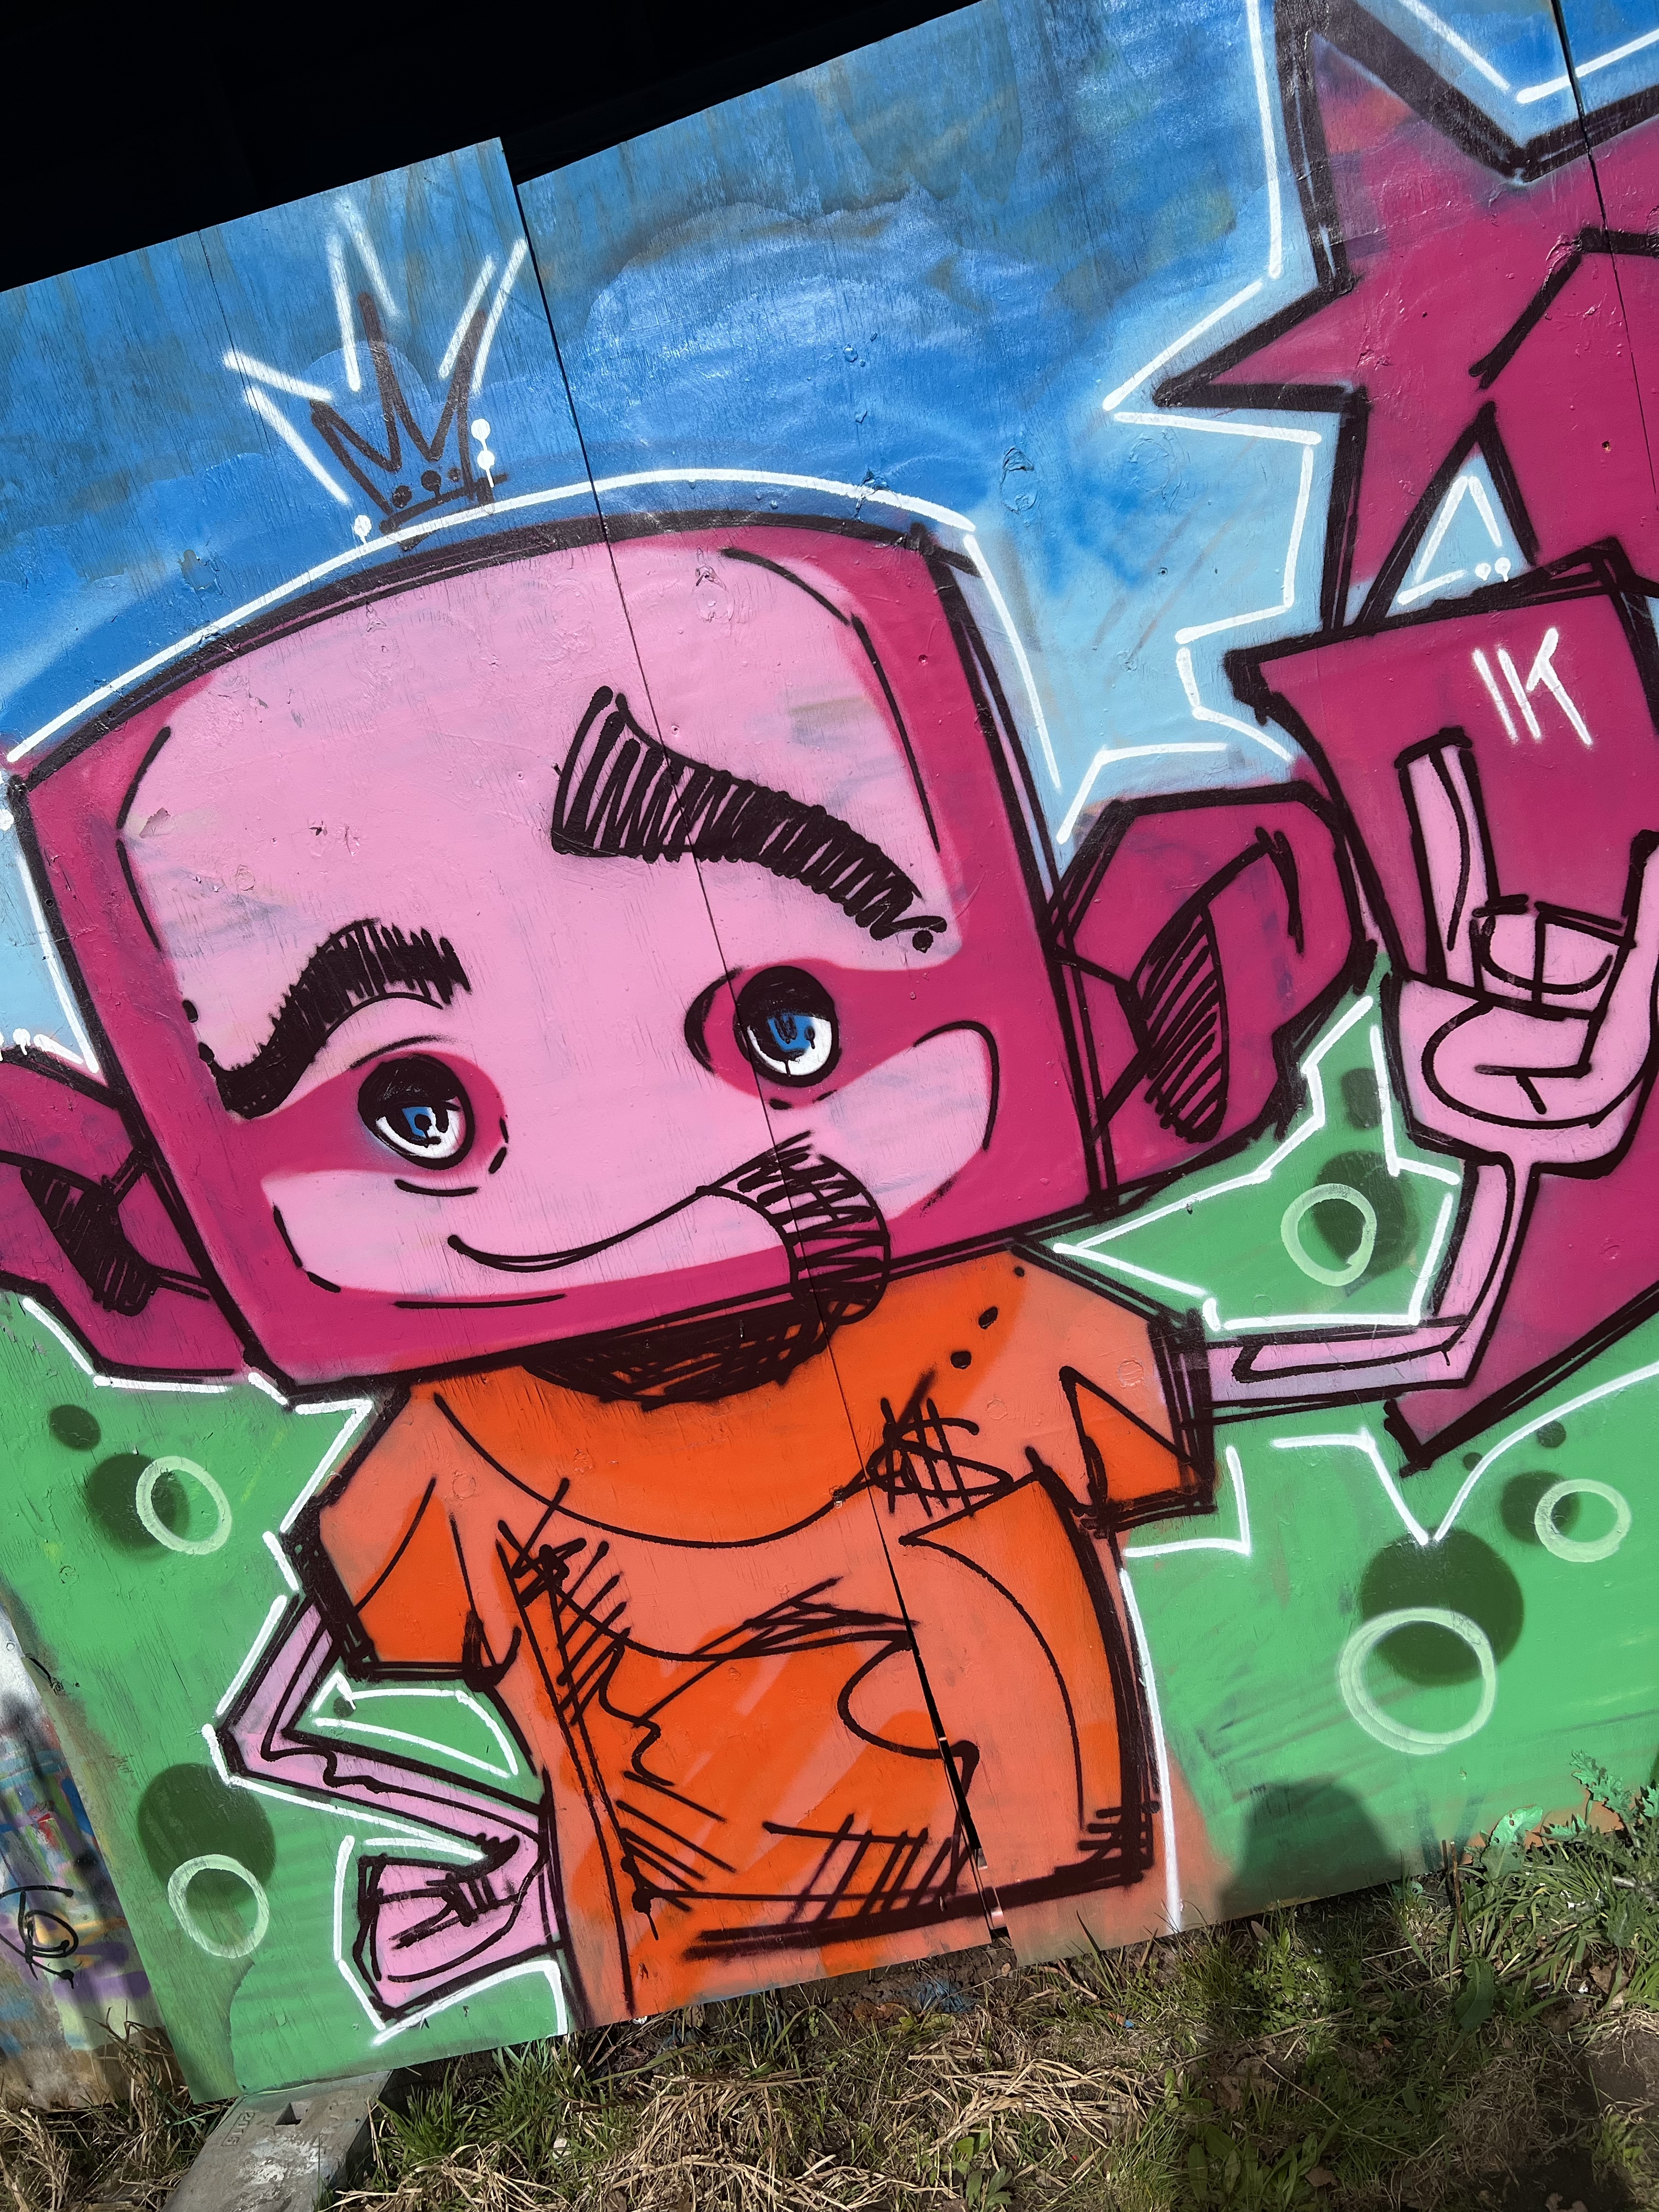 Exploring Utrecht’s Vibrant Graffiti Scene: The Next Piece in the Hall of Fame